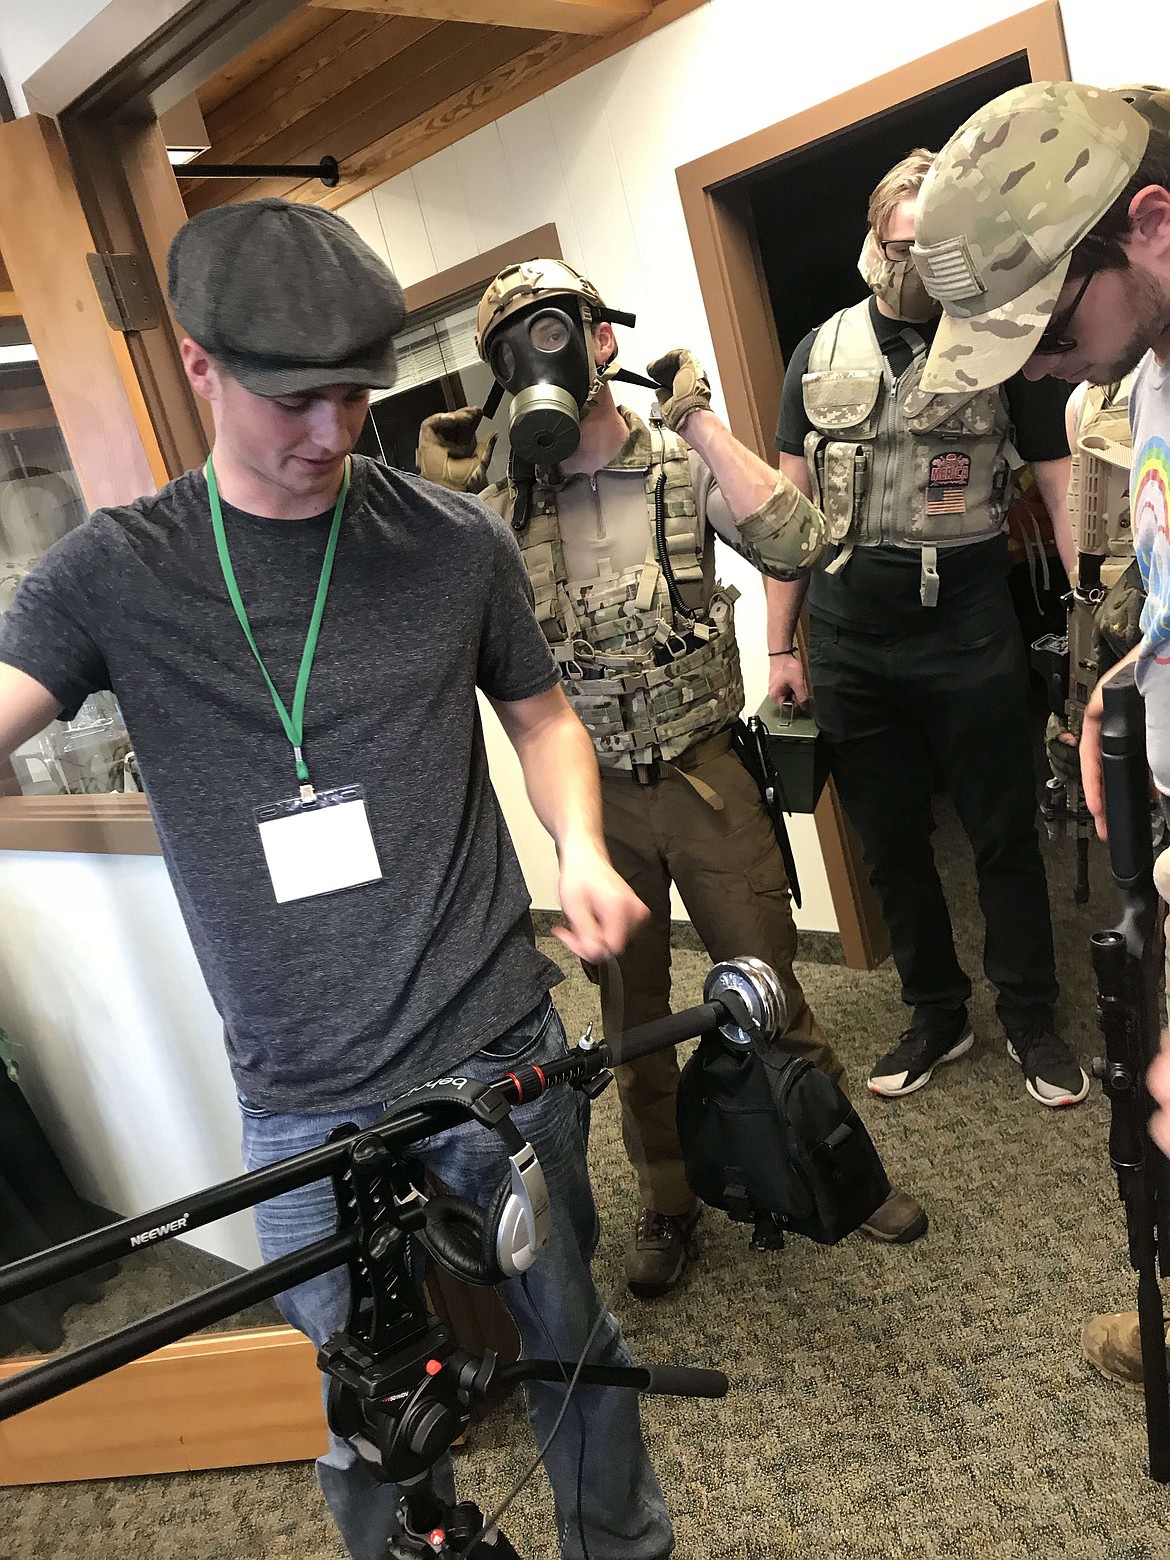 Taylor Riley, left, in gray cap, prepares some equipment as the &quot;mercenaries&quot; suit up for the next scene of &quot;Odd or Even,&quot; an original film written and directed by Taylor. The film will premiere Tuesday, May 29 at 5 p.m. in the Hayden Discount Cinemas. Admission is $3. (Courtesy photo)